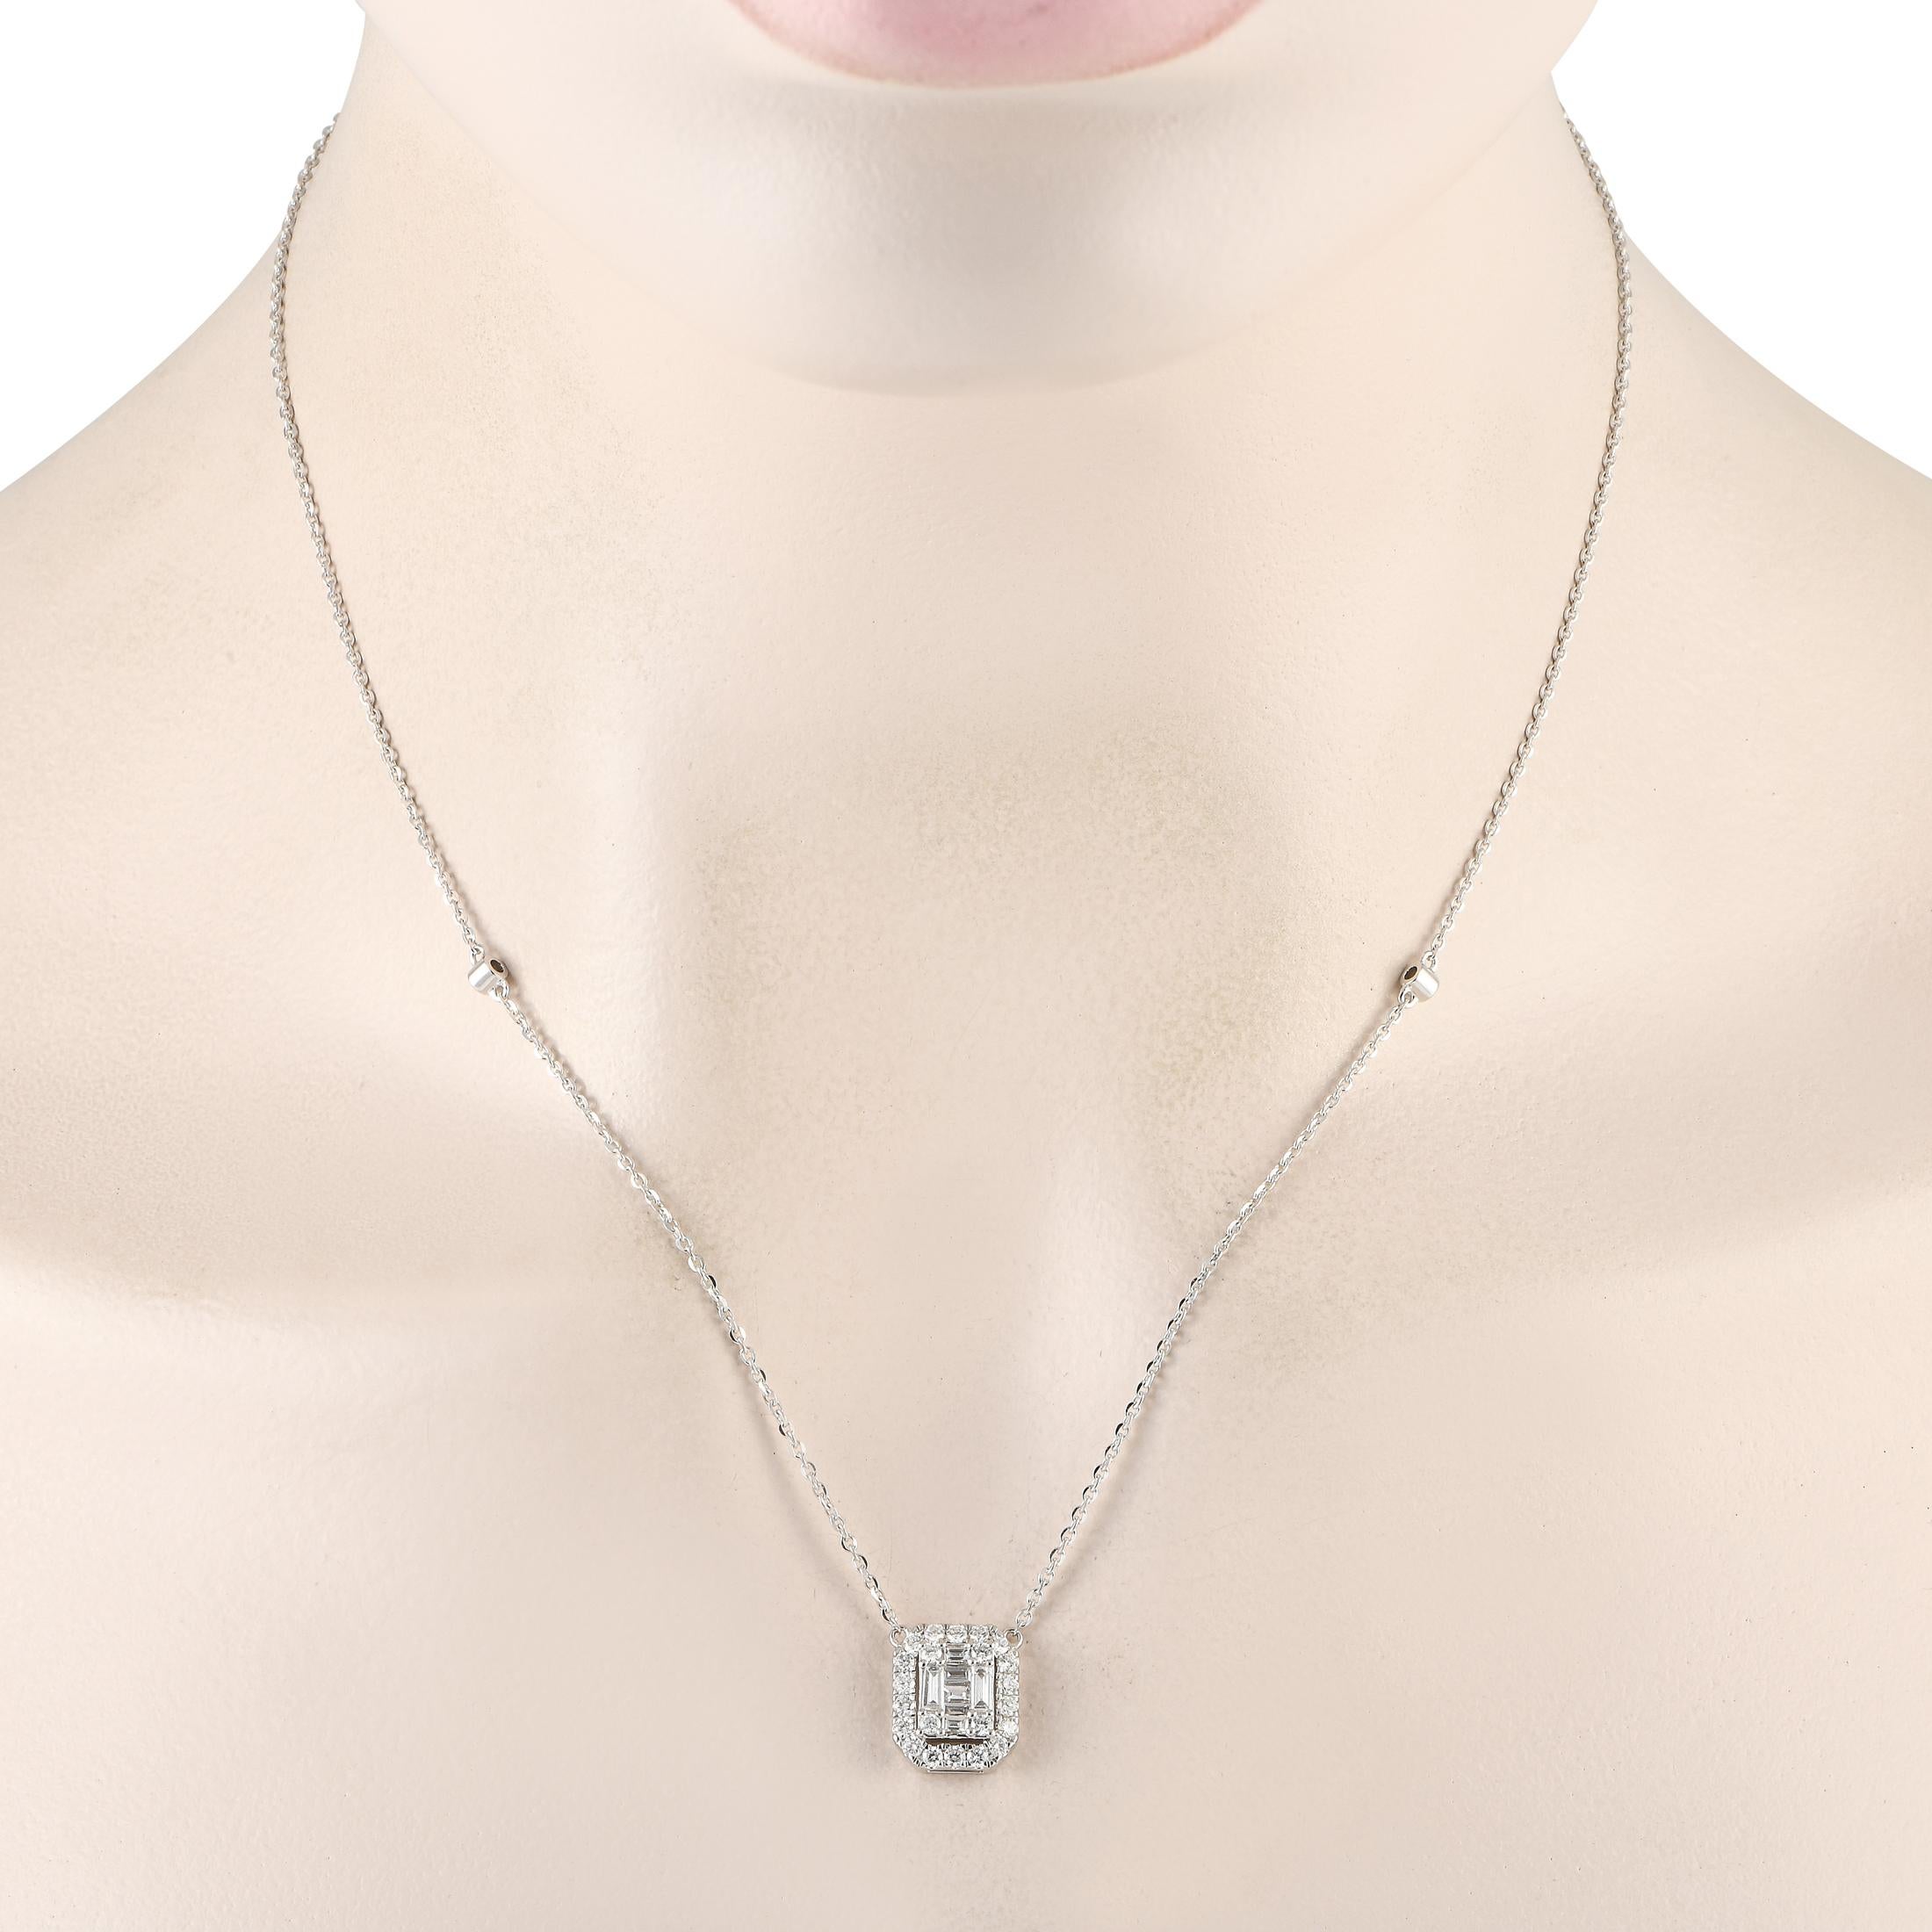 The glittering accessory to wear when your simple outfit needs an extra dose of style. This necklace is crafted in 14K white gold, with an 18-inch-long chain fastened by a lobster clasp. The 0.5 x 0.45 quadrilateral pendant features a cushion-shaped